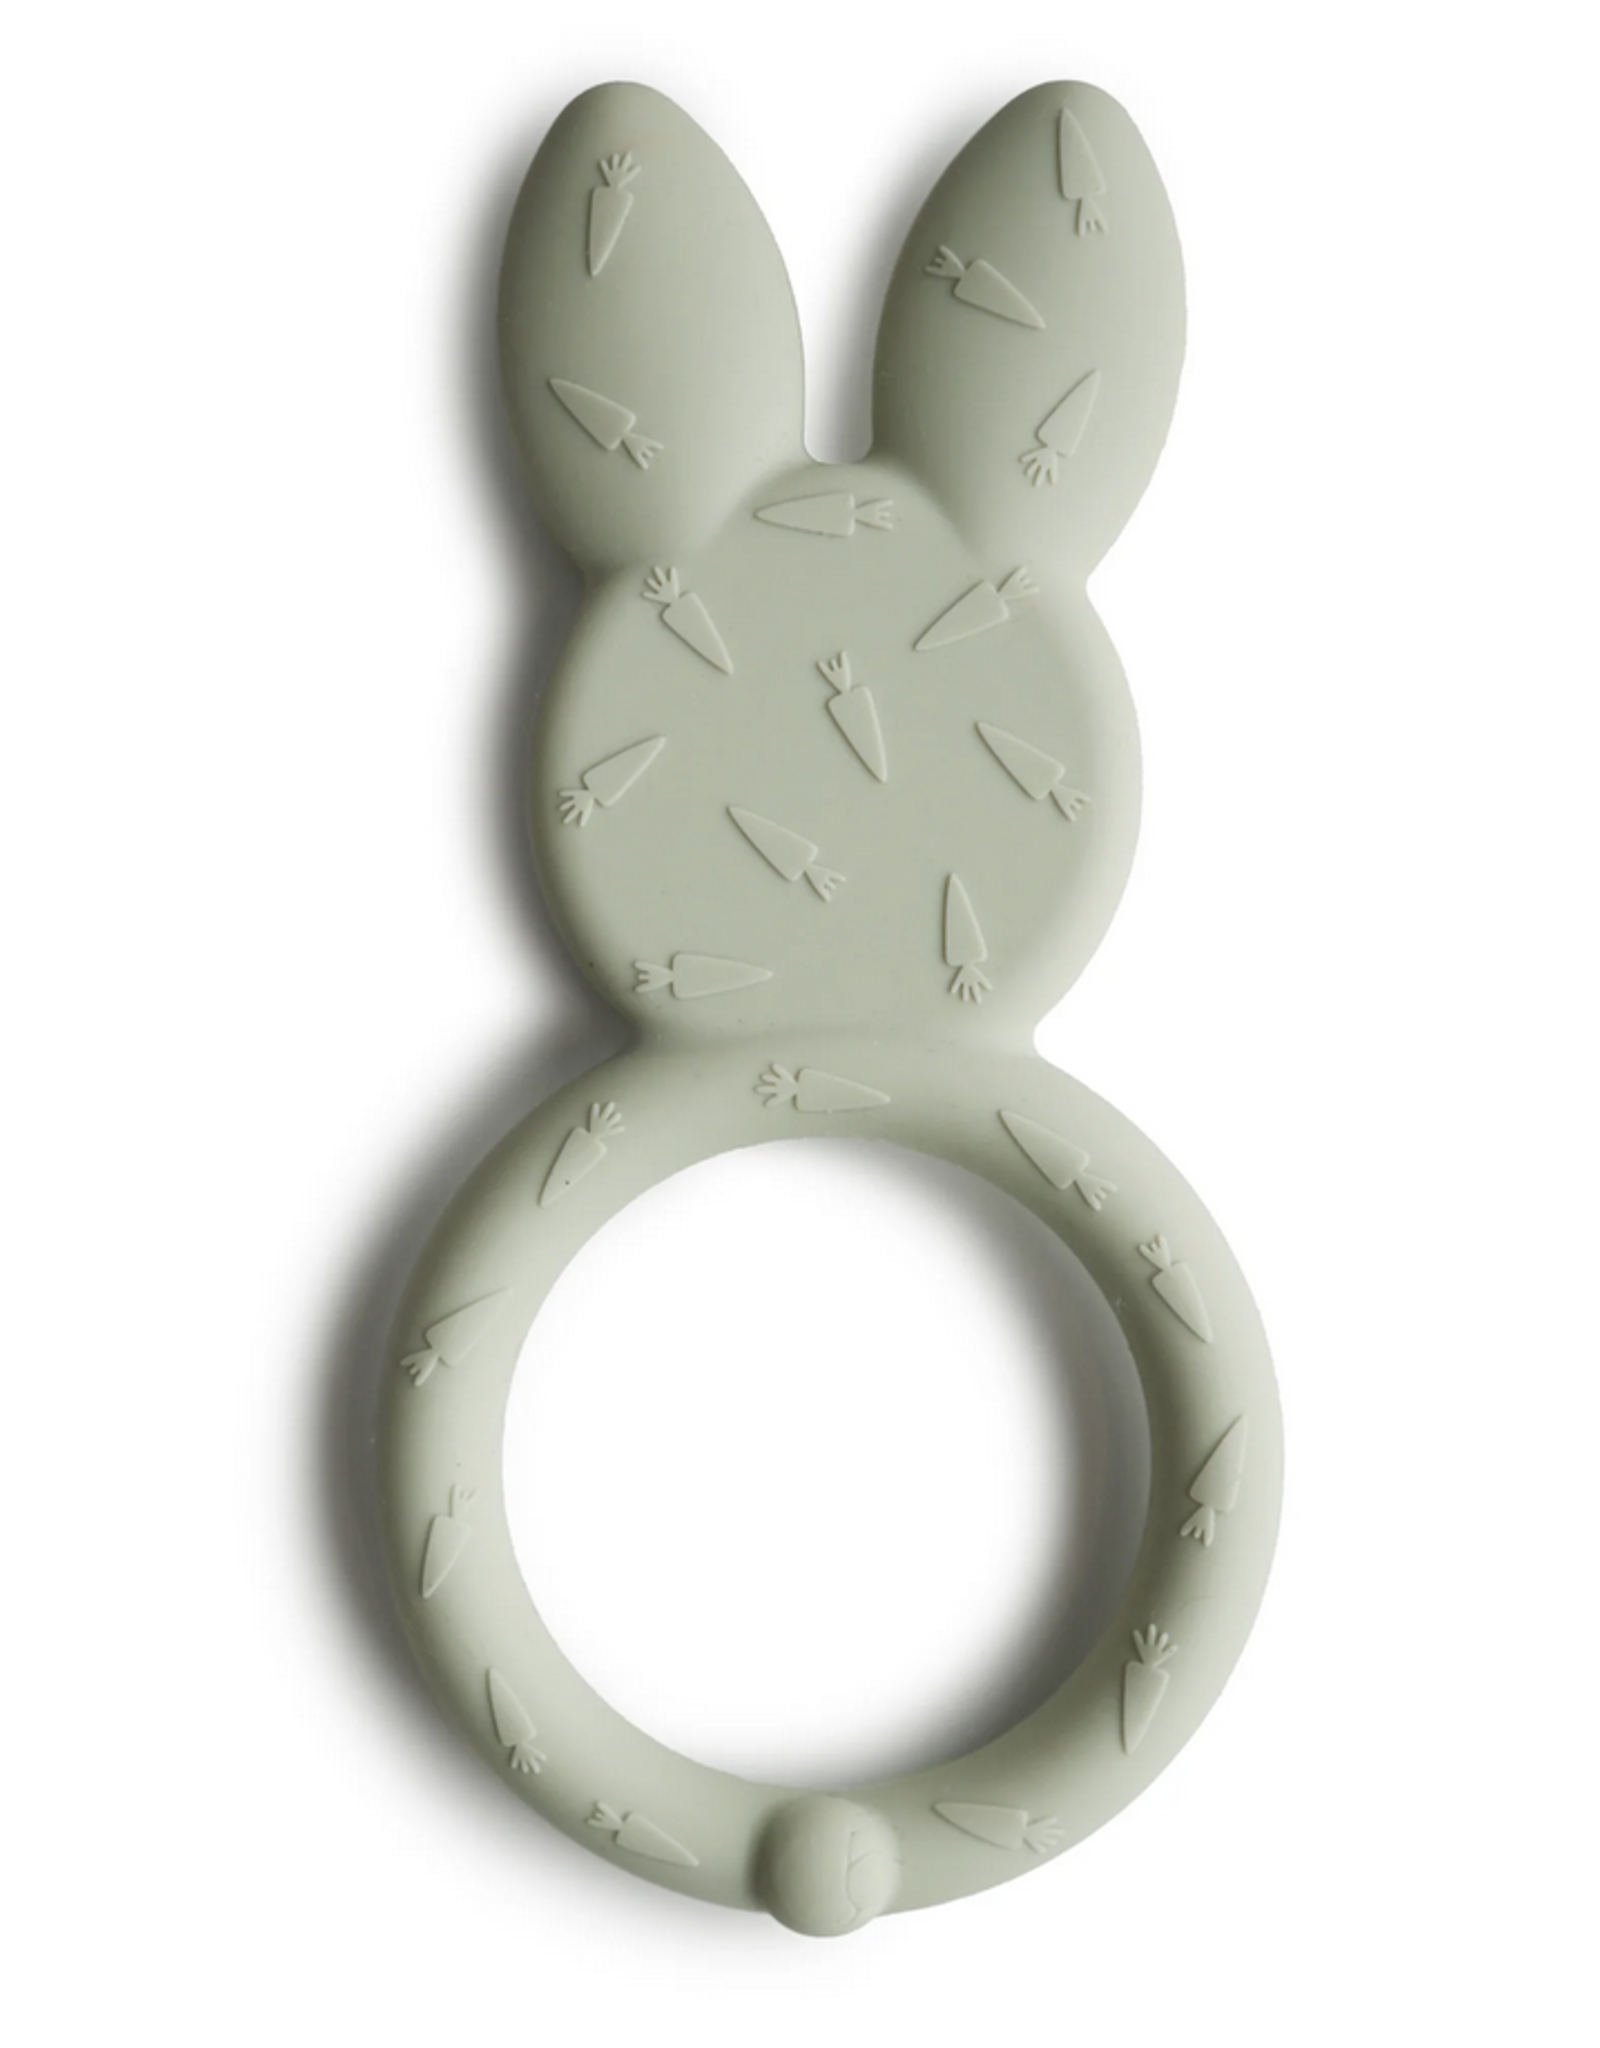 Mushie silicone teether